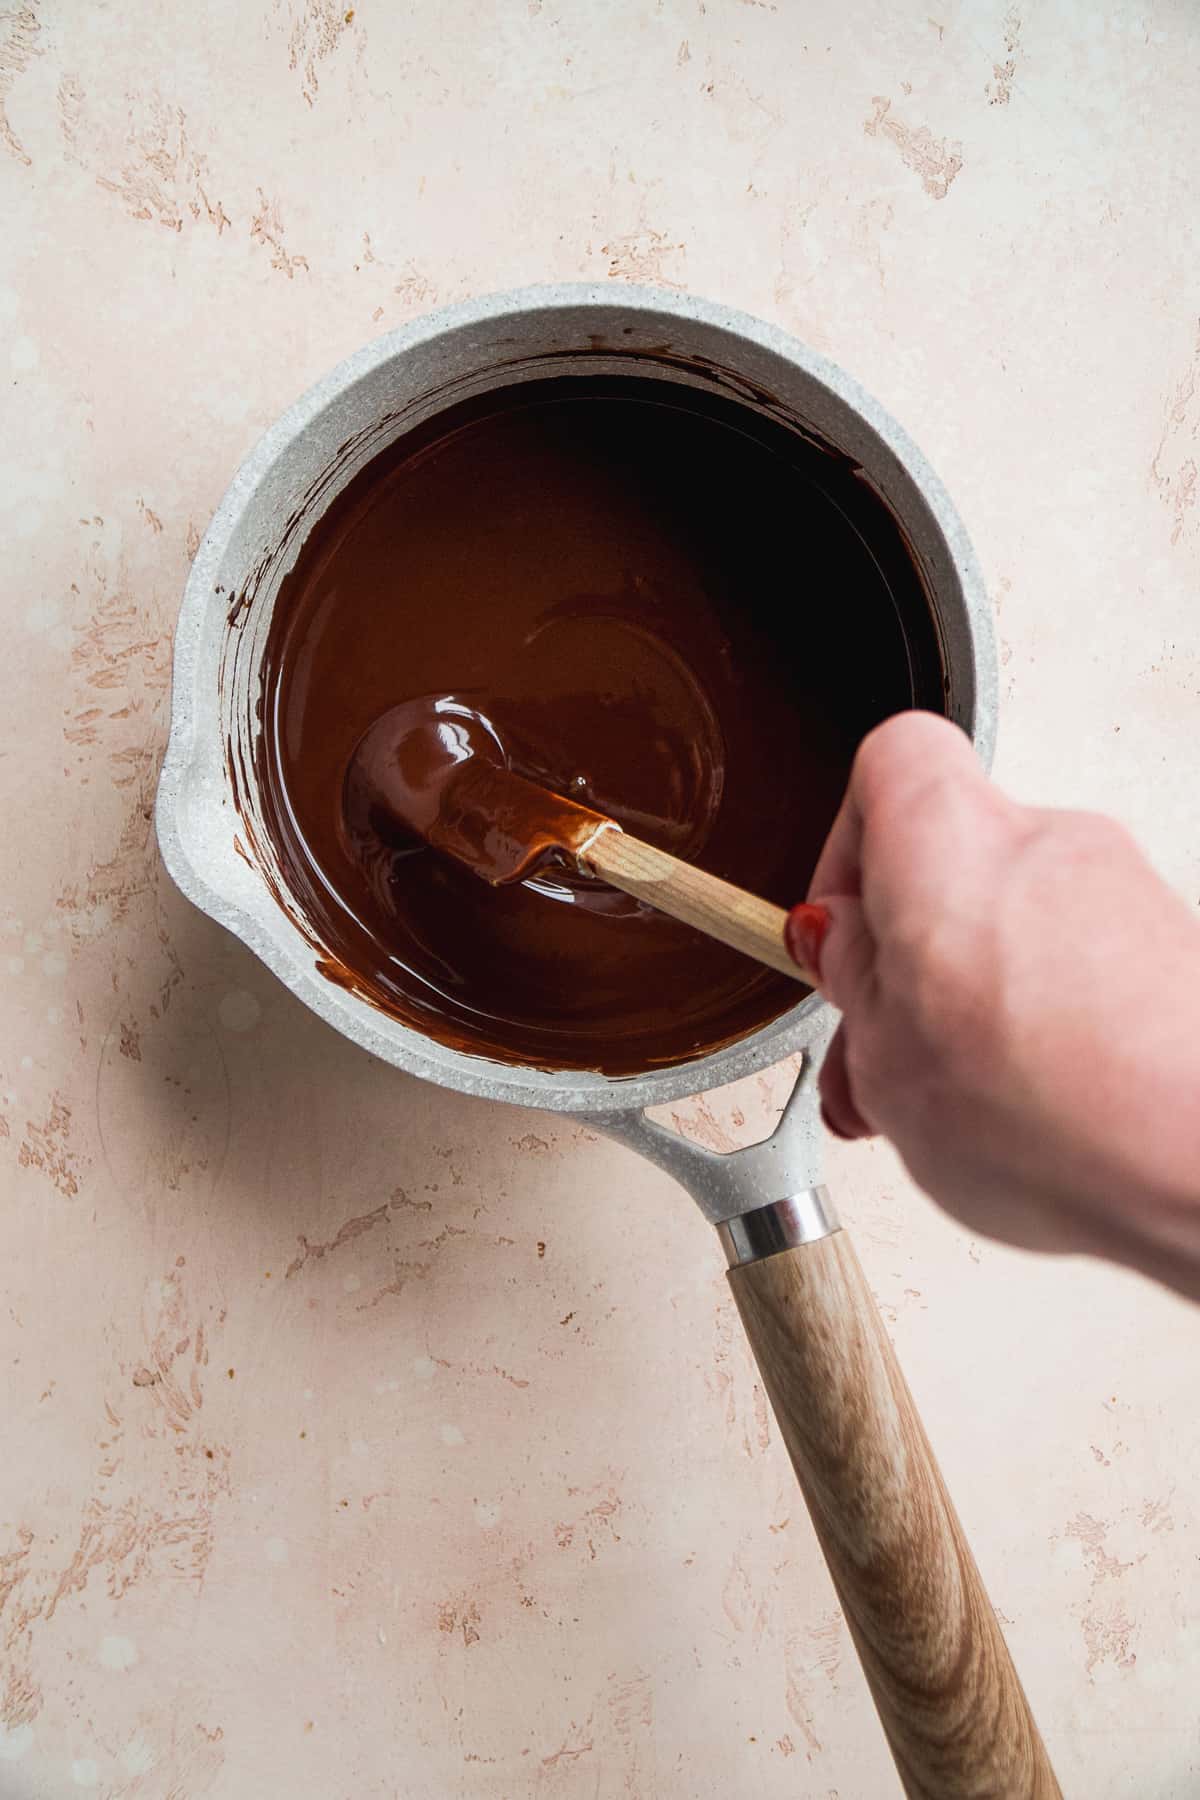 Person melting chocolate in a pot.